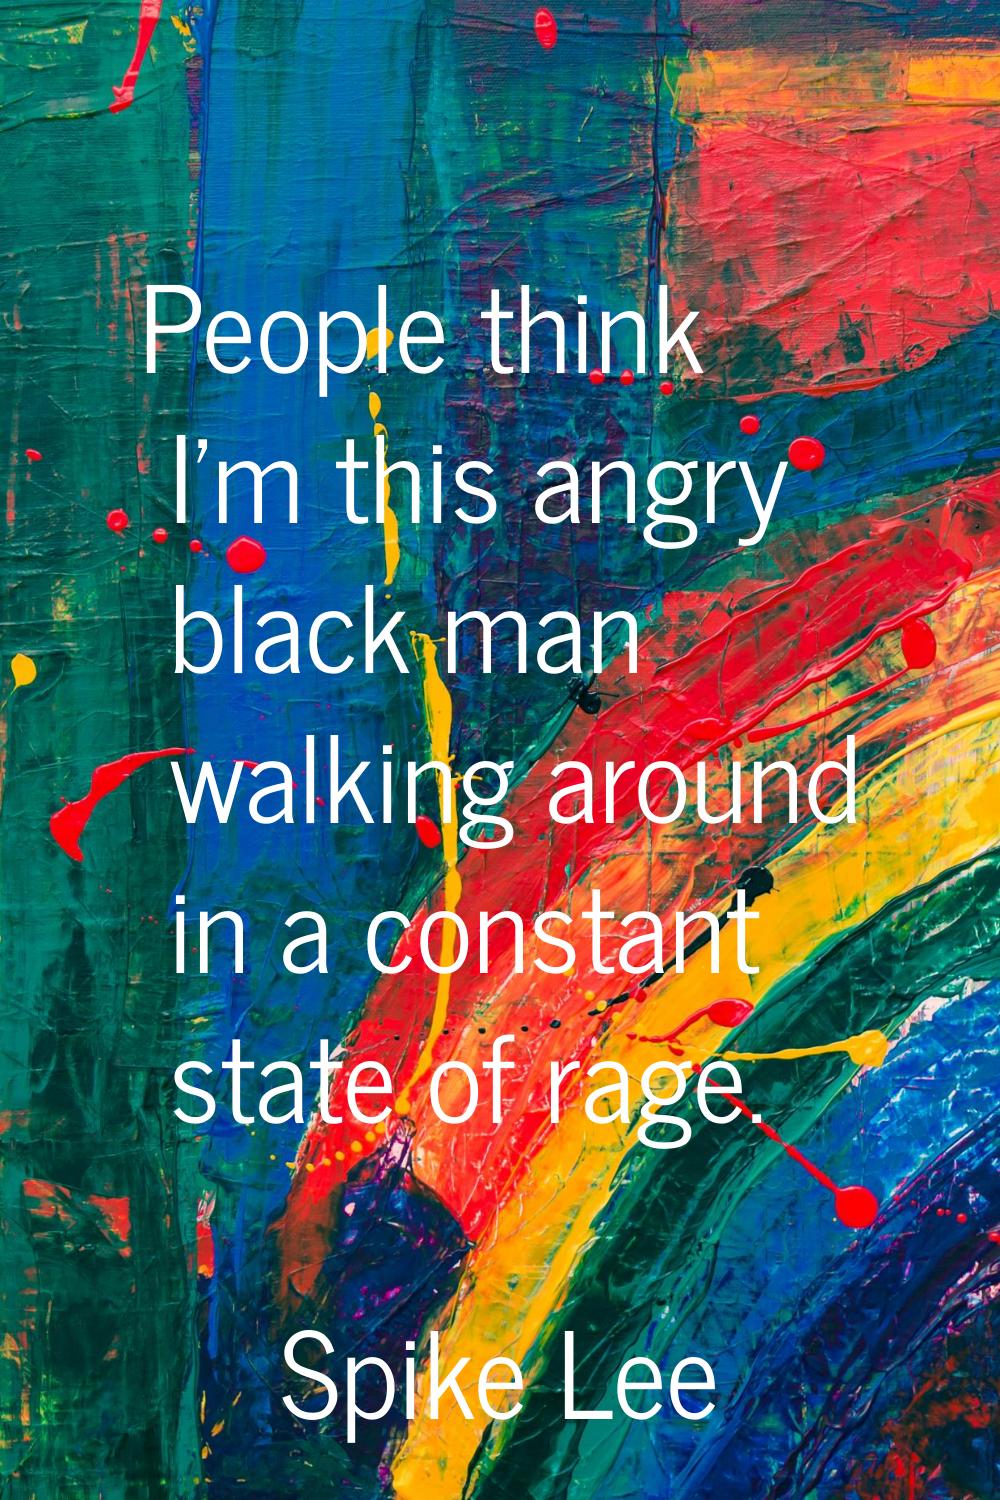 People think I'm this angry black man walking around in a constant state of rage.